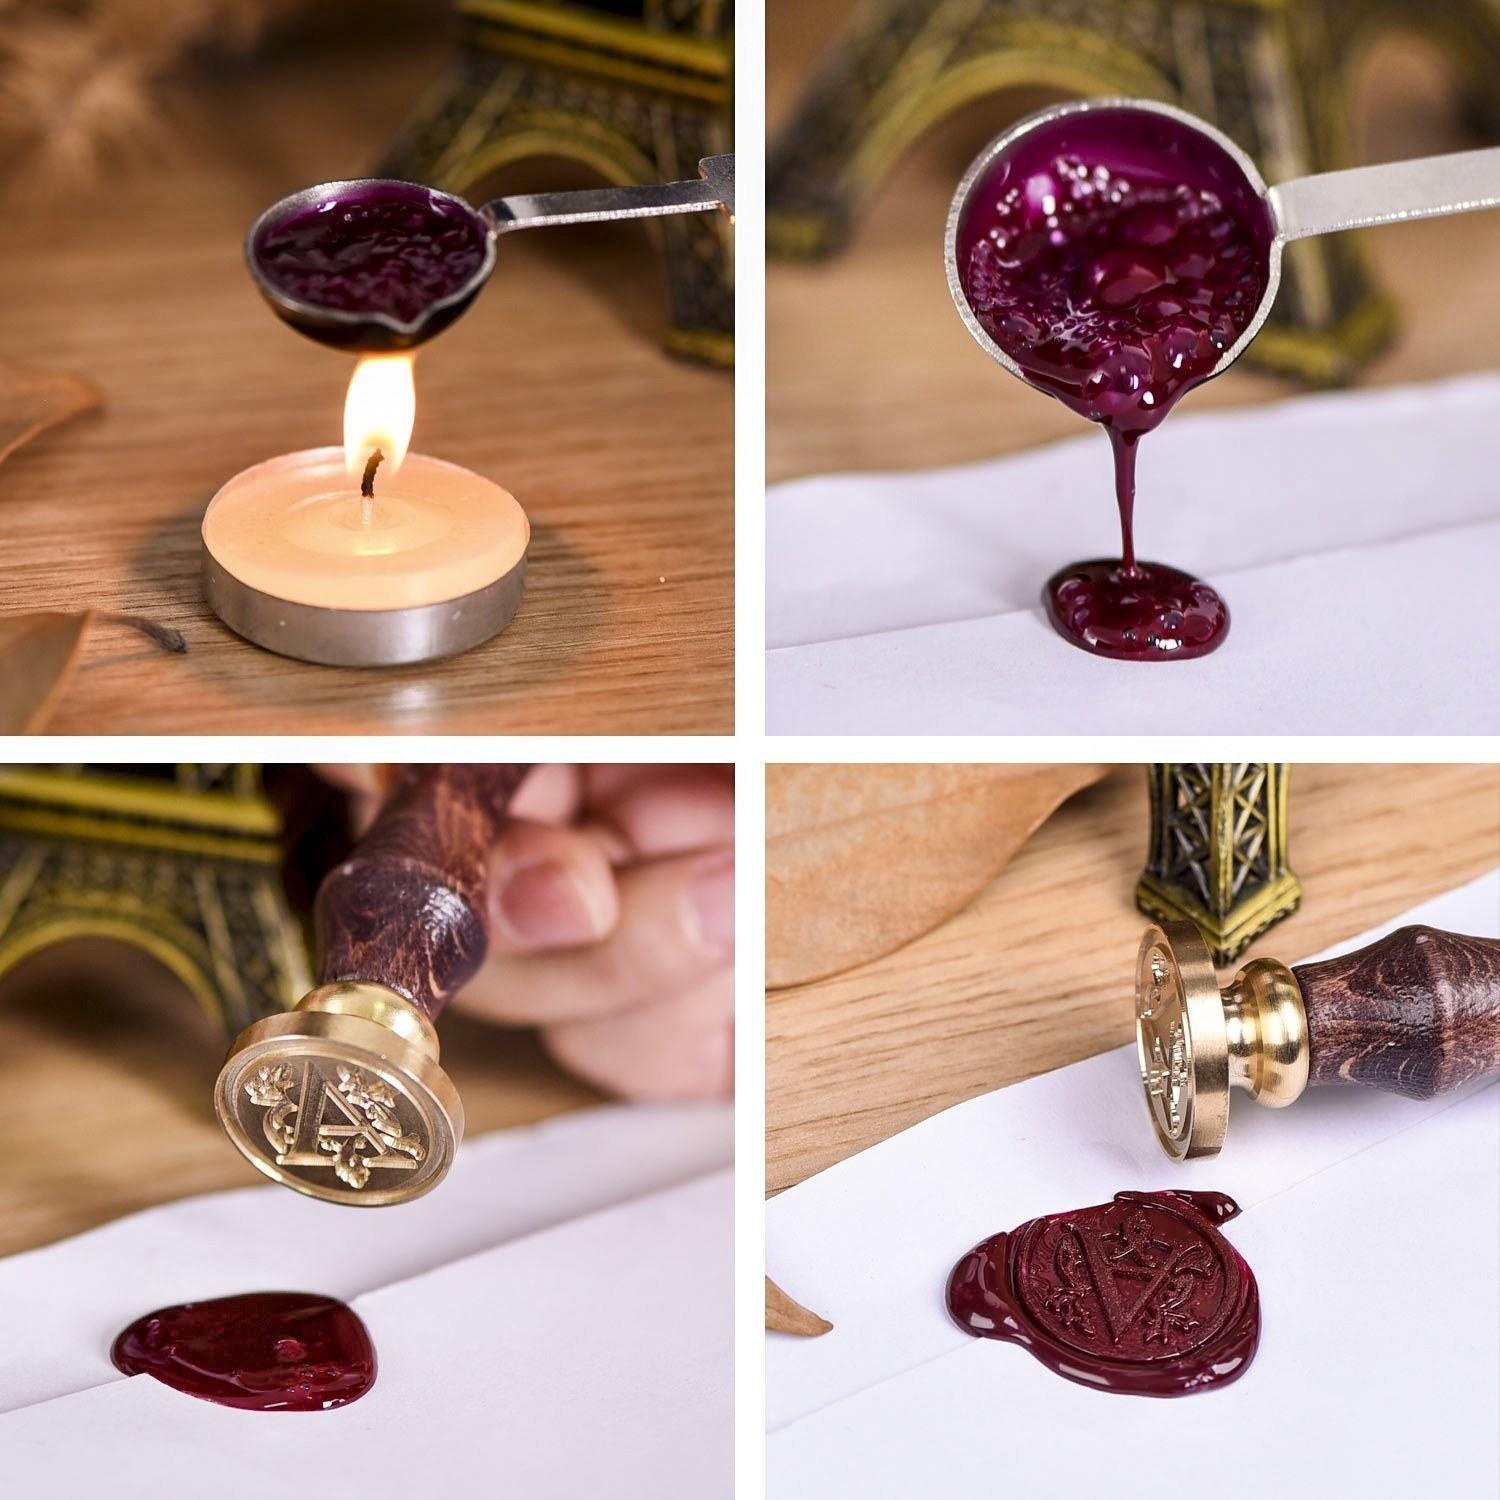 Four images of wax being melted and stamped on an envelope